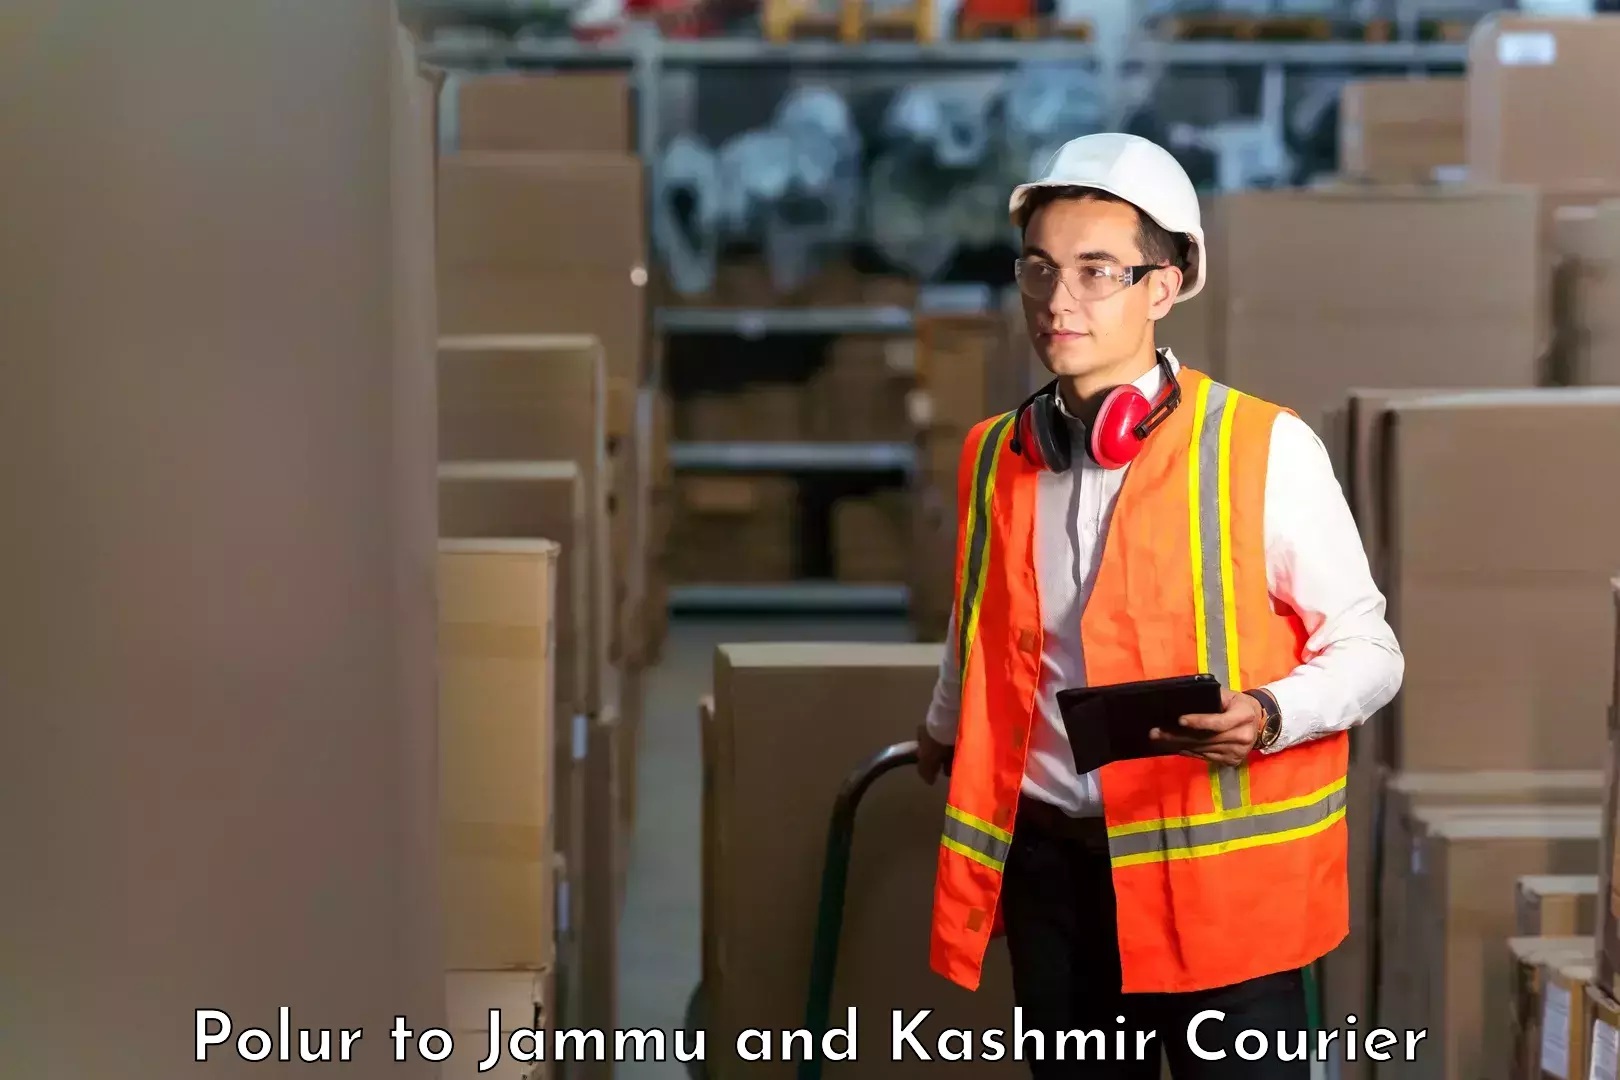 Efficient package consolidation Polur to Jammu and Kashmir